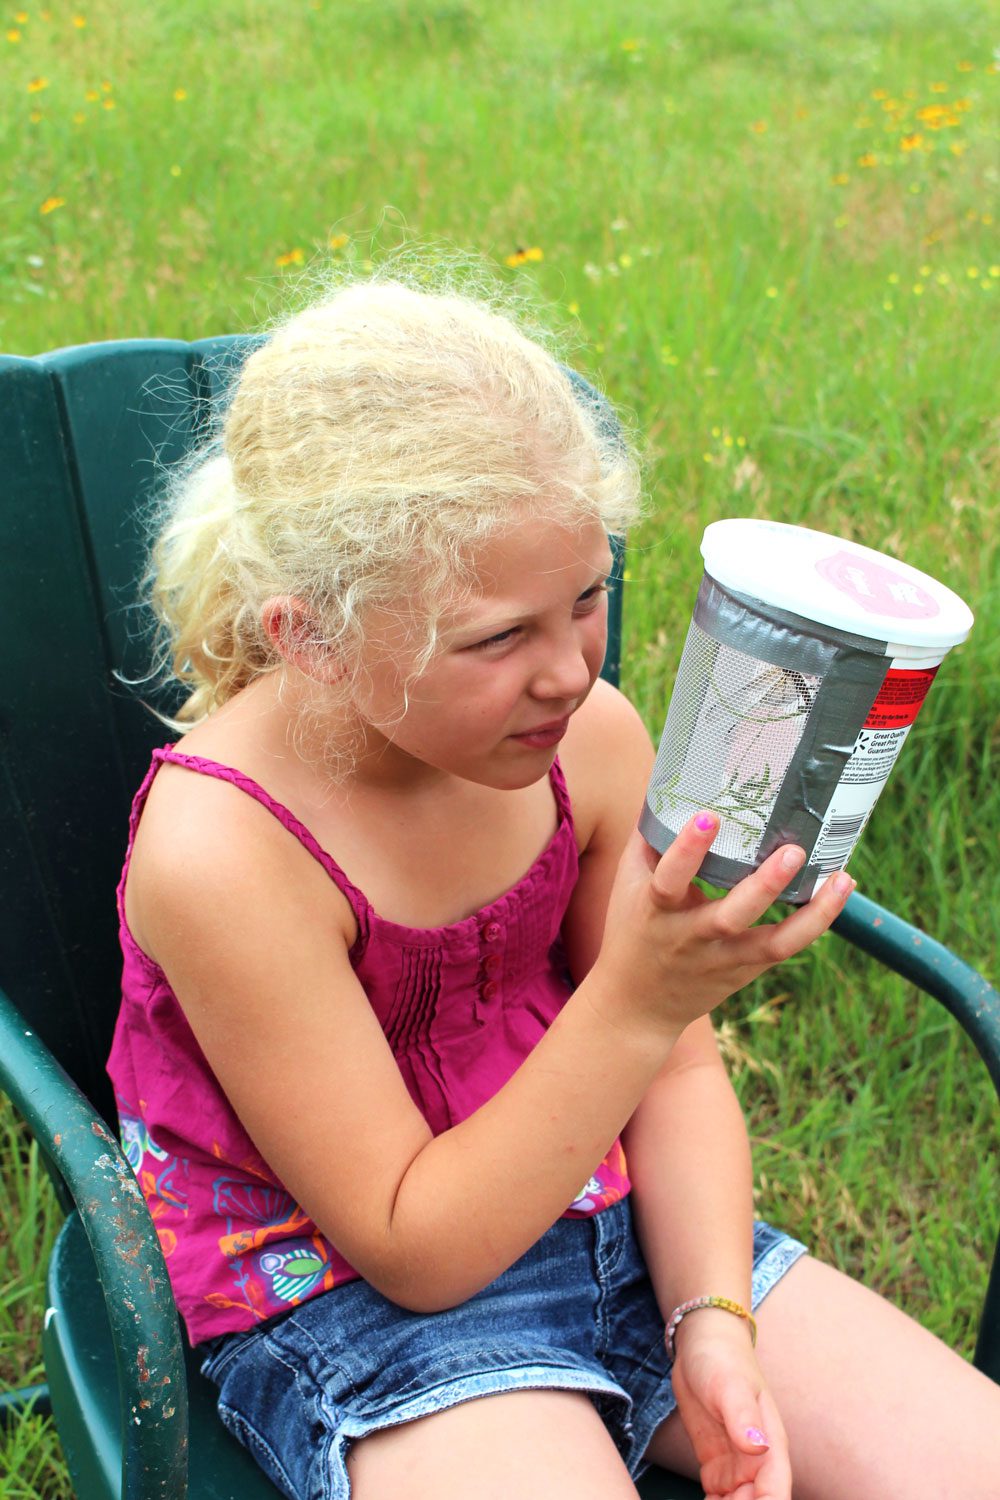 A young girl looks at the bug box she has made from a yogurt container.